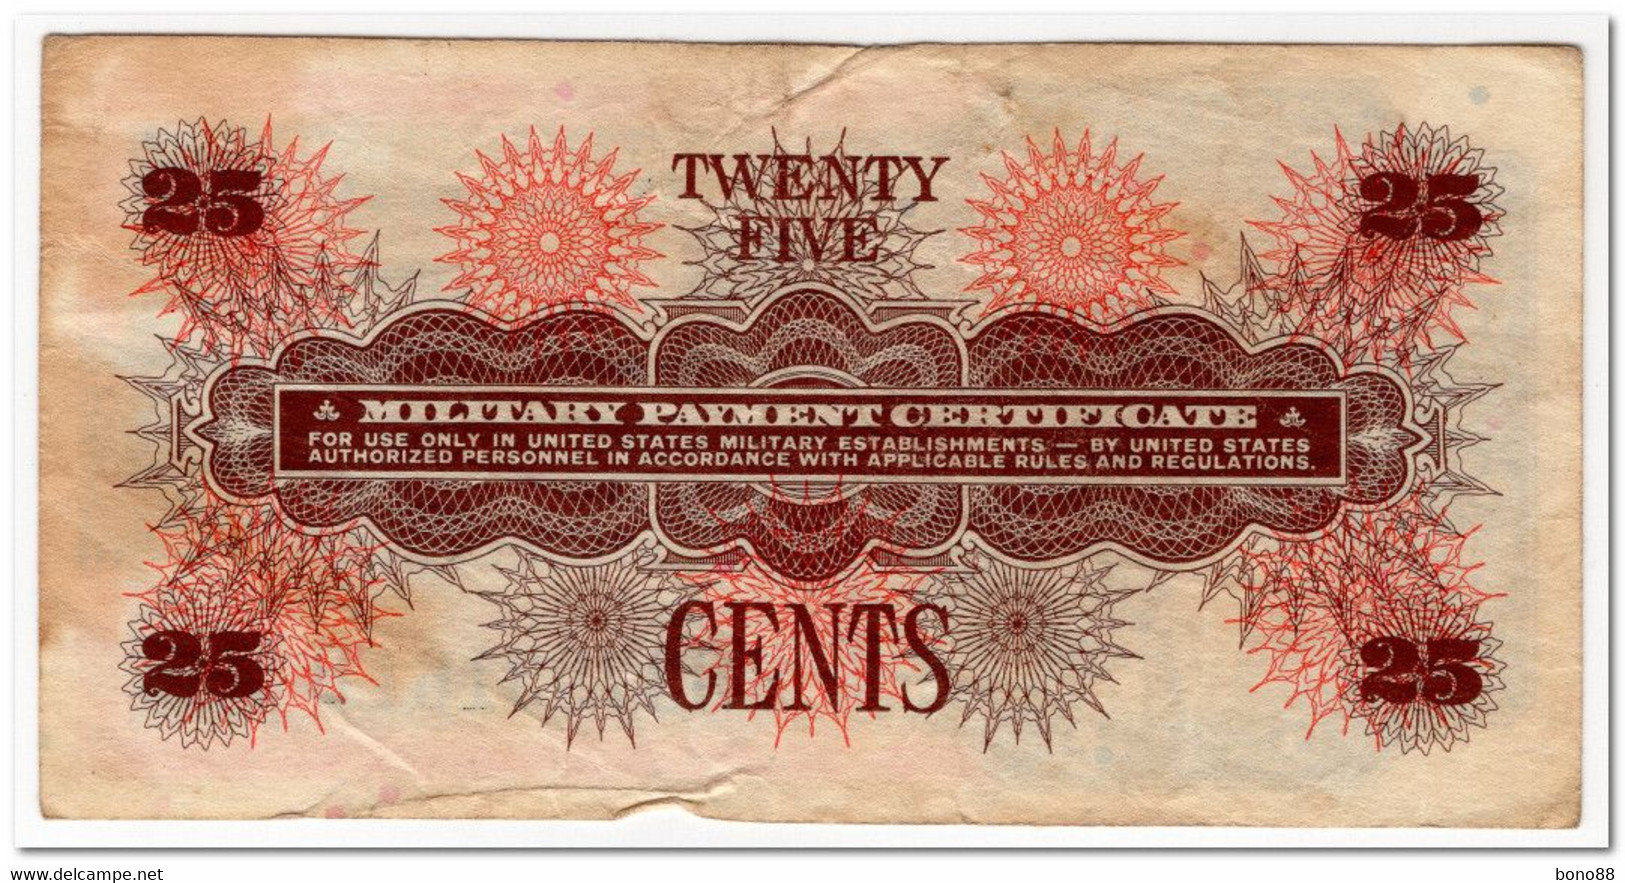 UNITED STATES,MILITARY PAYMENT CERTIFICATE,25 CENTS,1968,M66,MICRO TEAR,F-VF - 1968-1969 - Serie 661